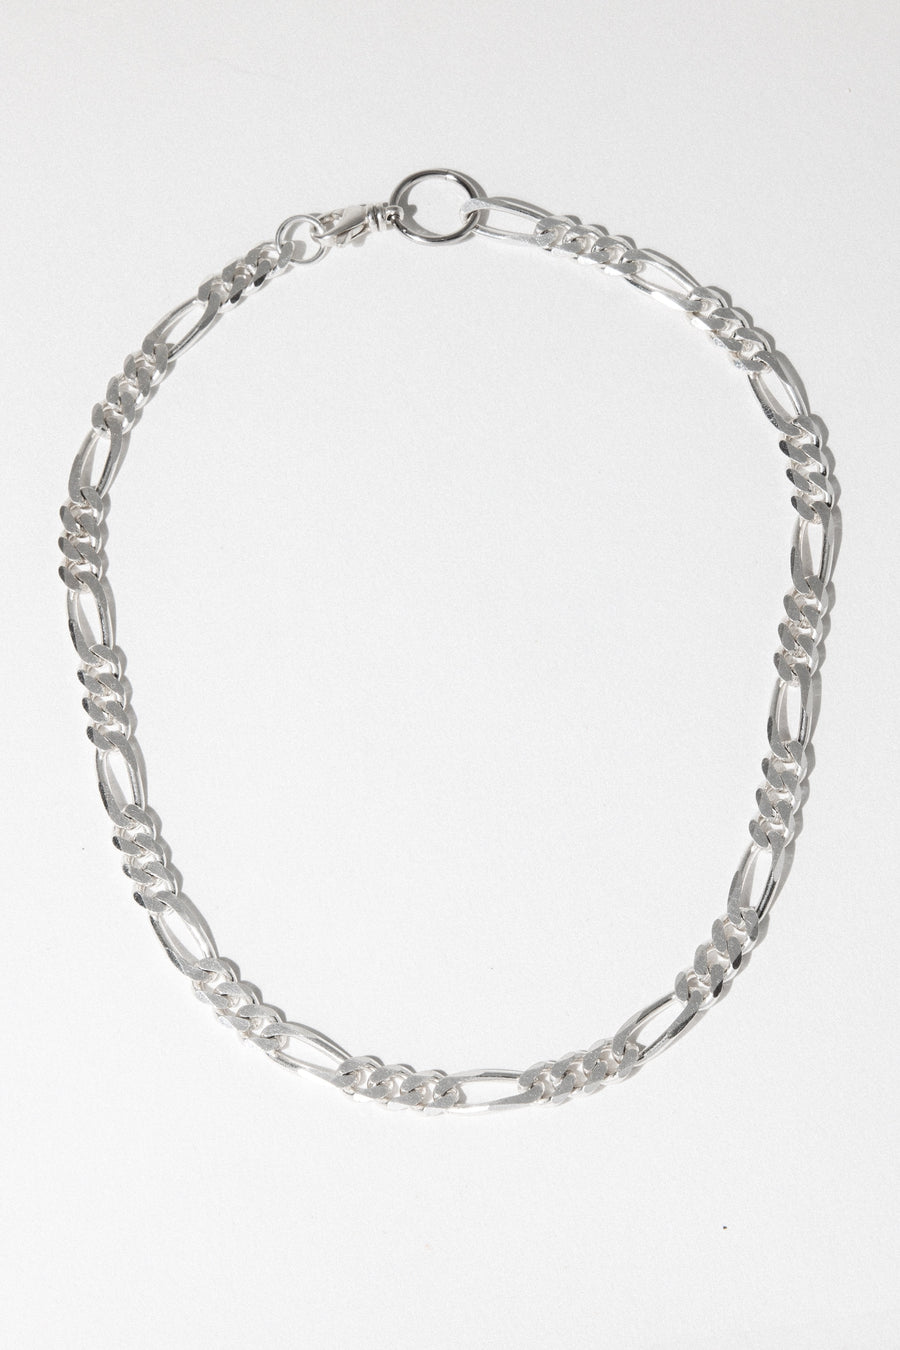 CGM Jewelry Silver / 16 Inches Milan Chain Necklace